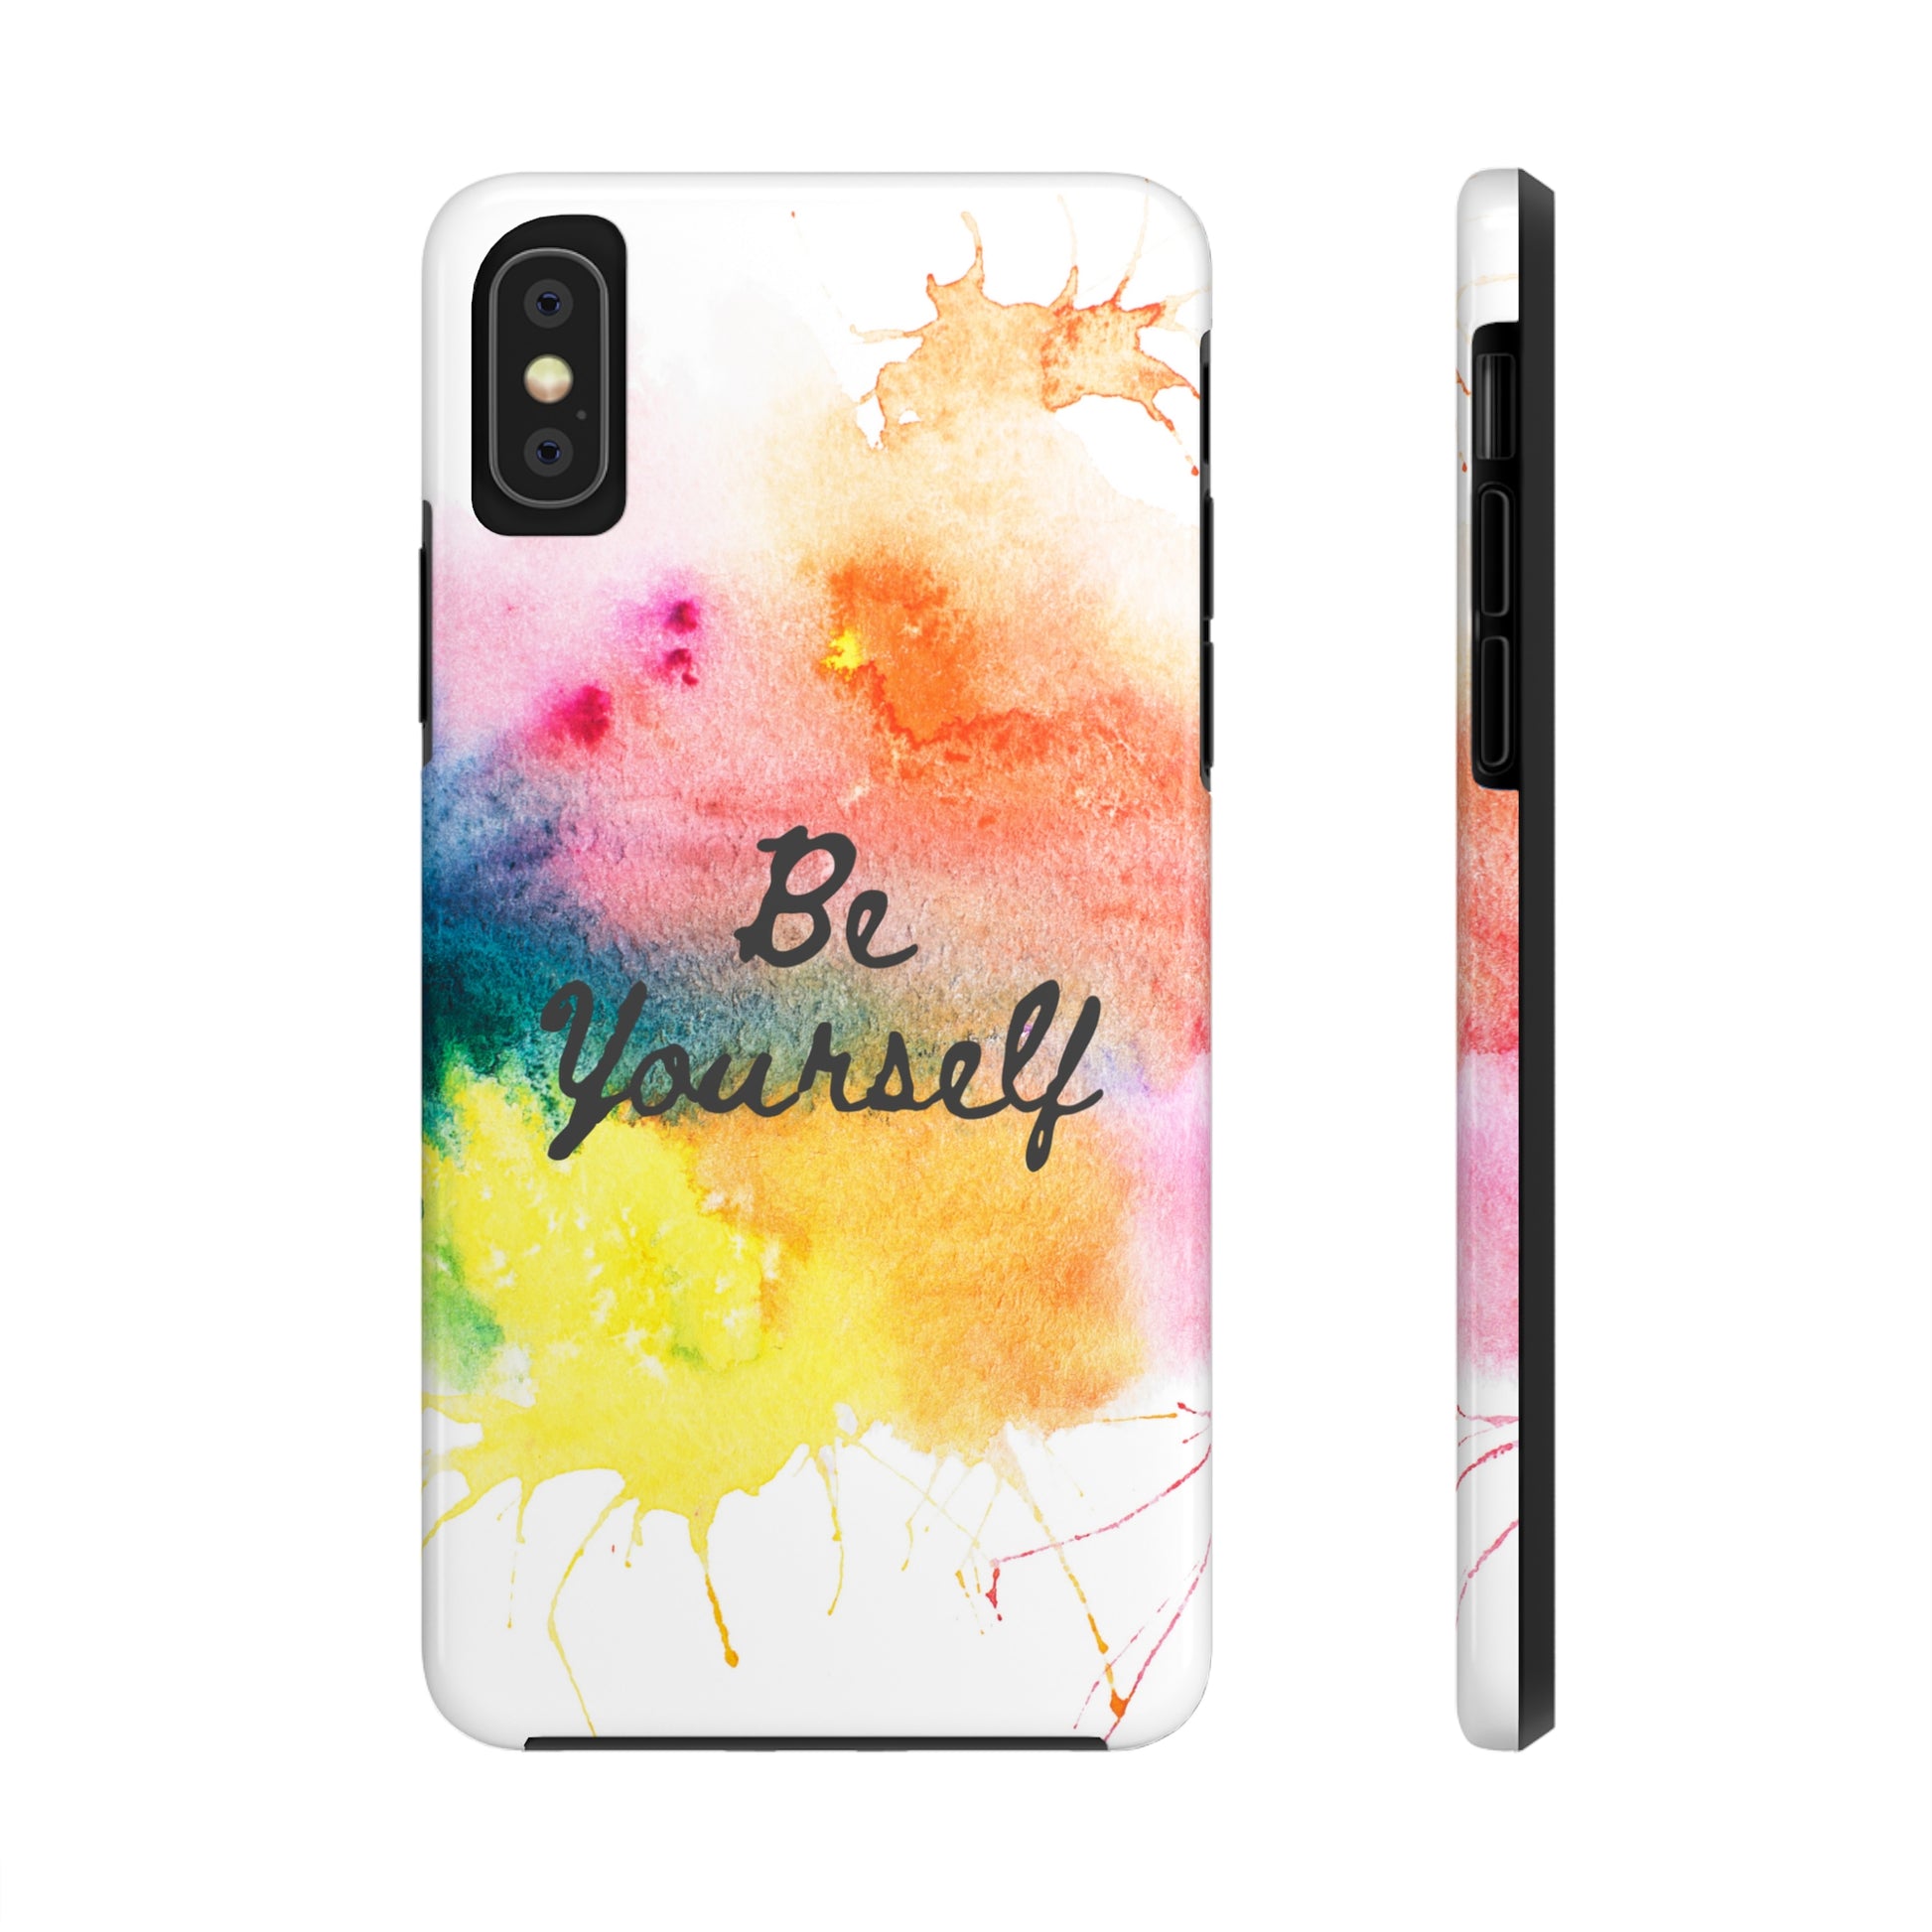 picture of an inspirational phone case that says, "be yourself" against a bright watercolor painting